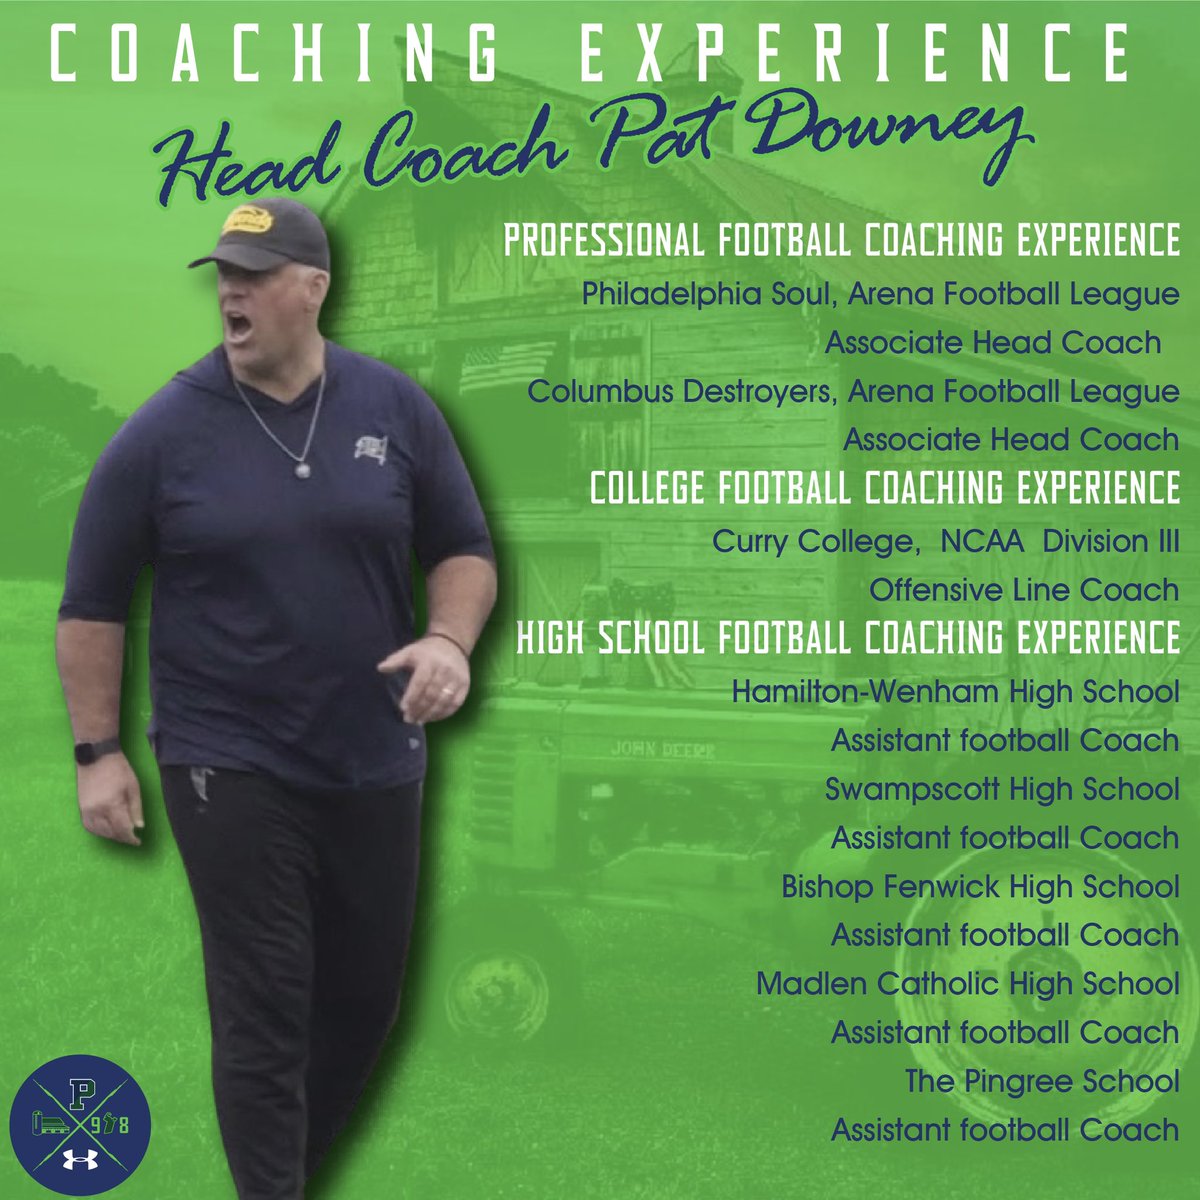 Honored to be named the 3rd Head Coach in the history of @PingreeFootball. A storied program with four @NEPSAC championships! A snapshot of my coaching career to this point ⬇️. Exited for this next chapter!!